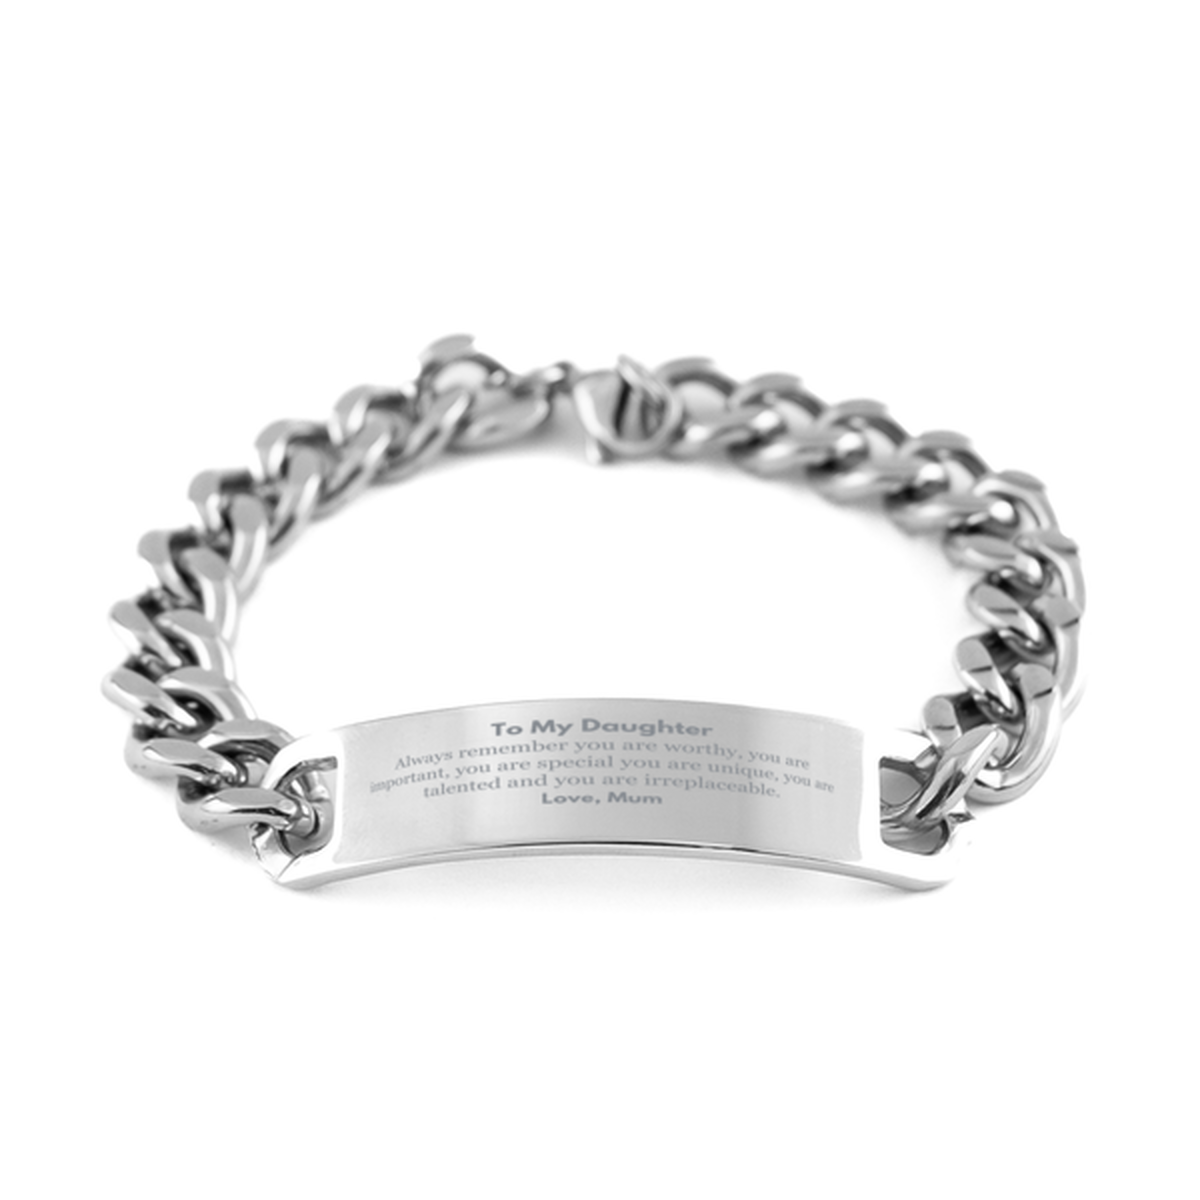 Daughter Birthday Gifts from Mum, Inspirational Cuban Chain Stainless Steel Bracelet for Daughter Christmas Graduation Gifts for Daughter Always remember you are worthy, you are important. Love, Mum